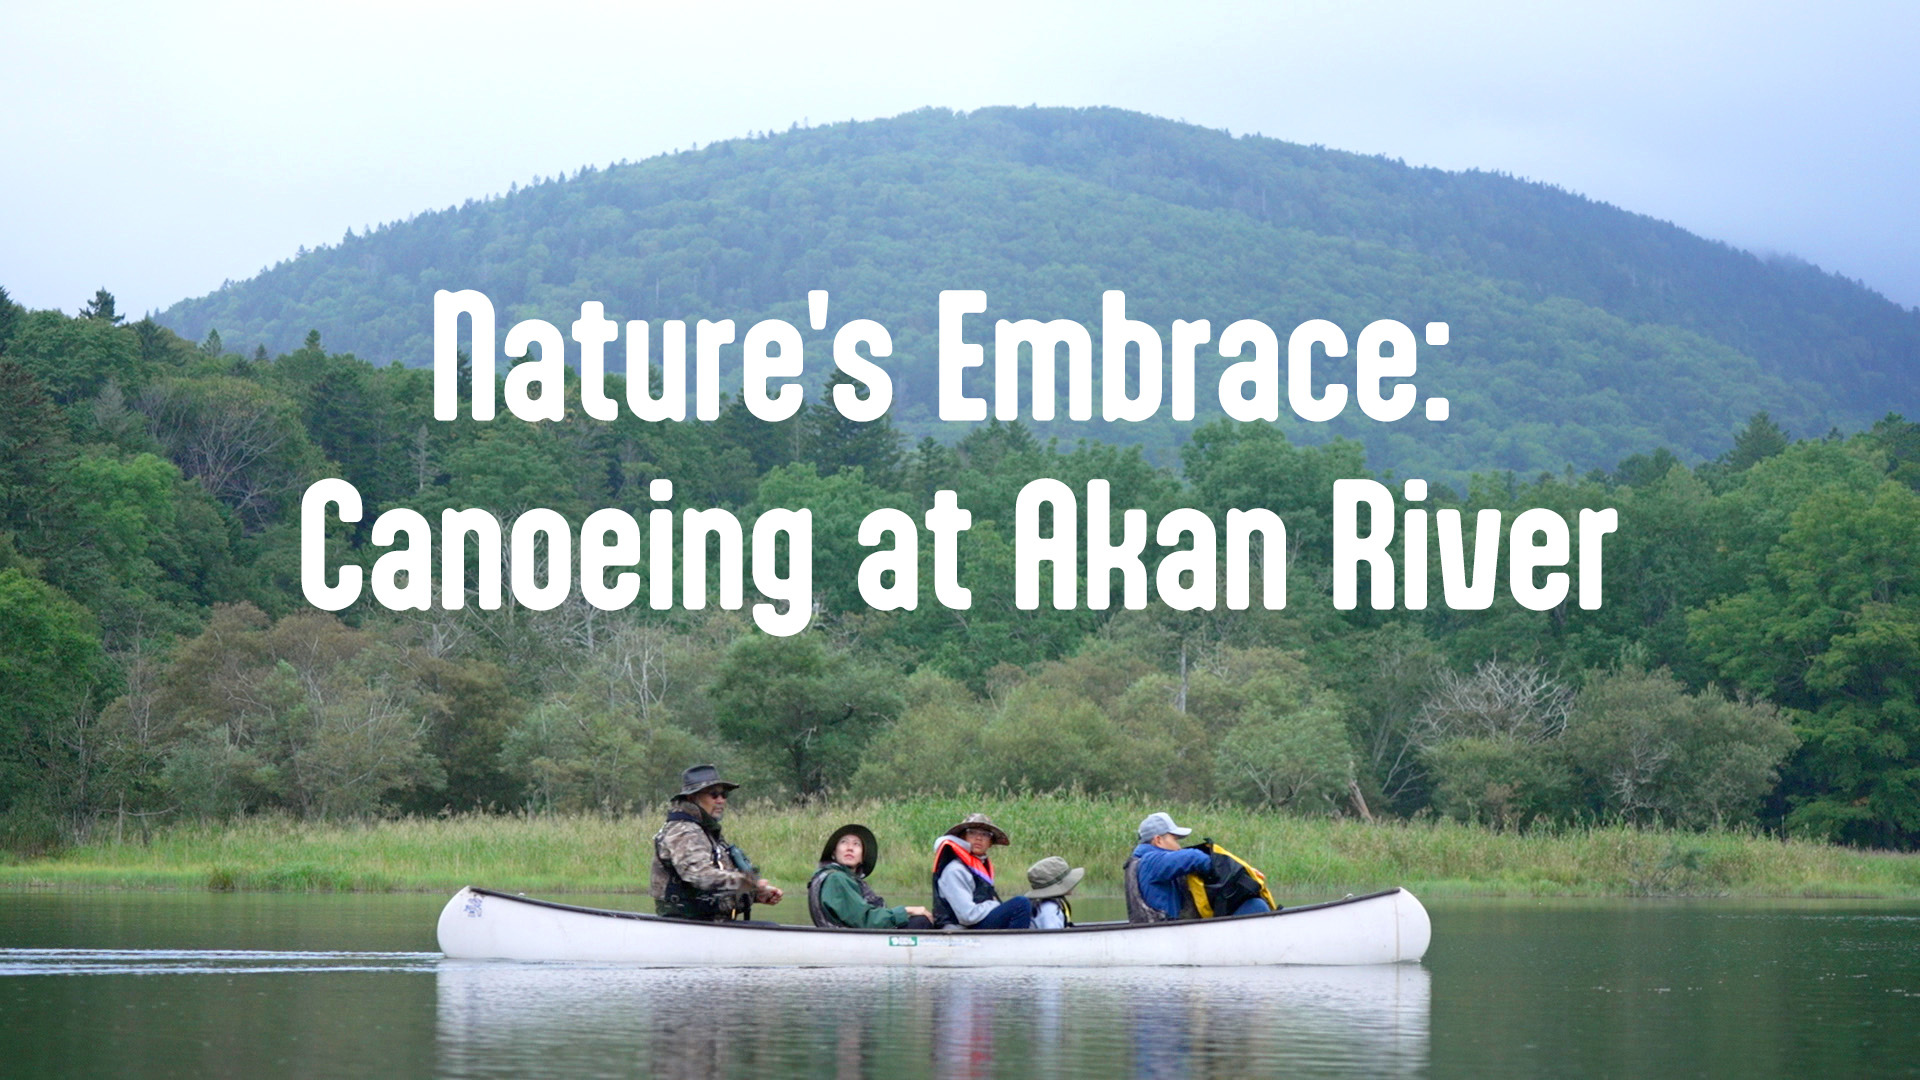 Nature’s Embrace: Canoeing at Akan River​